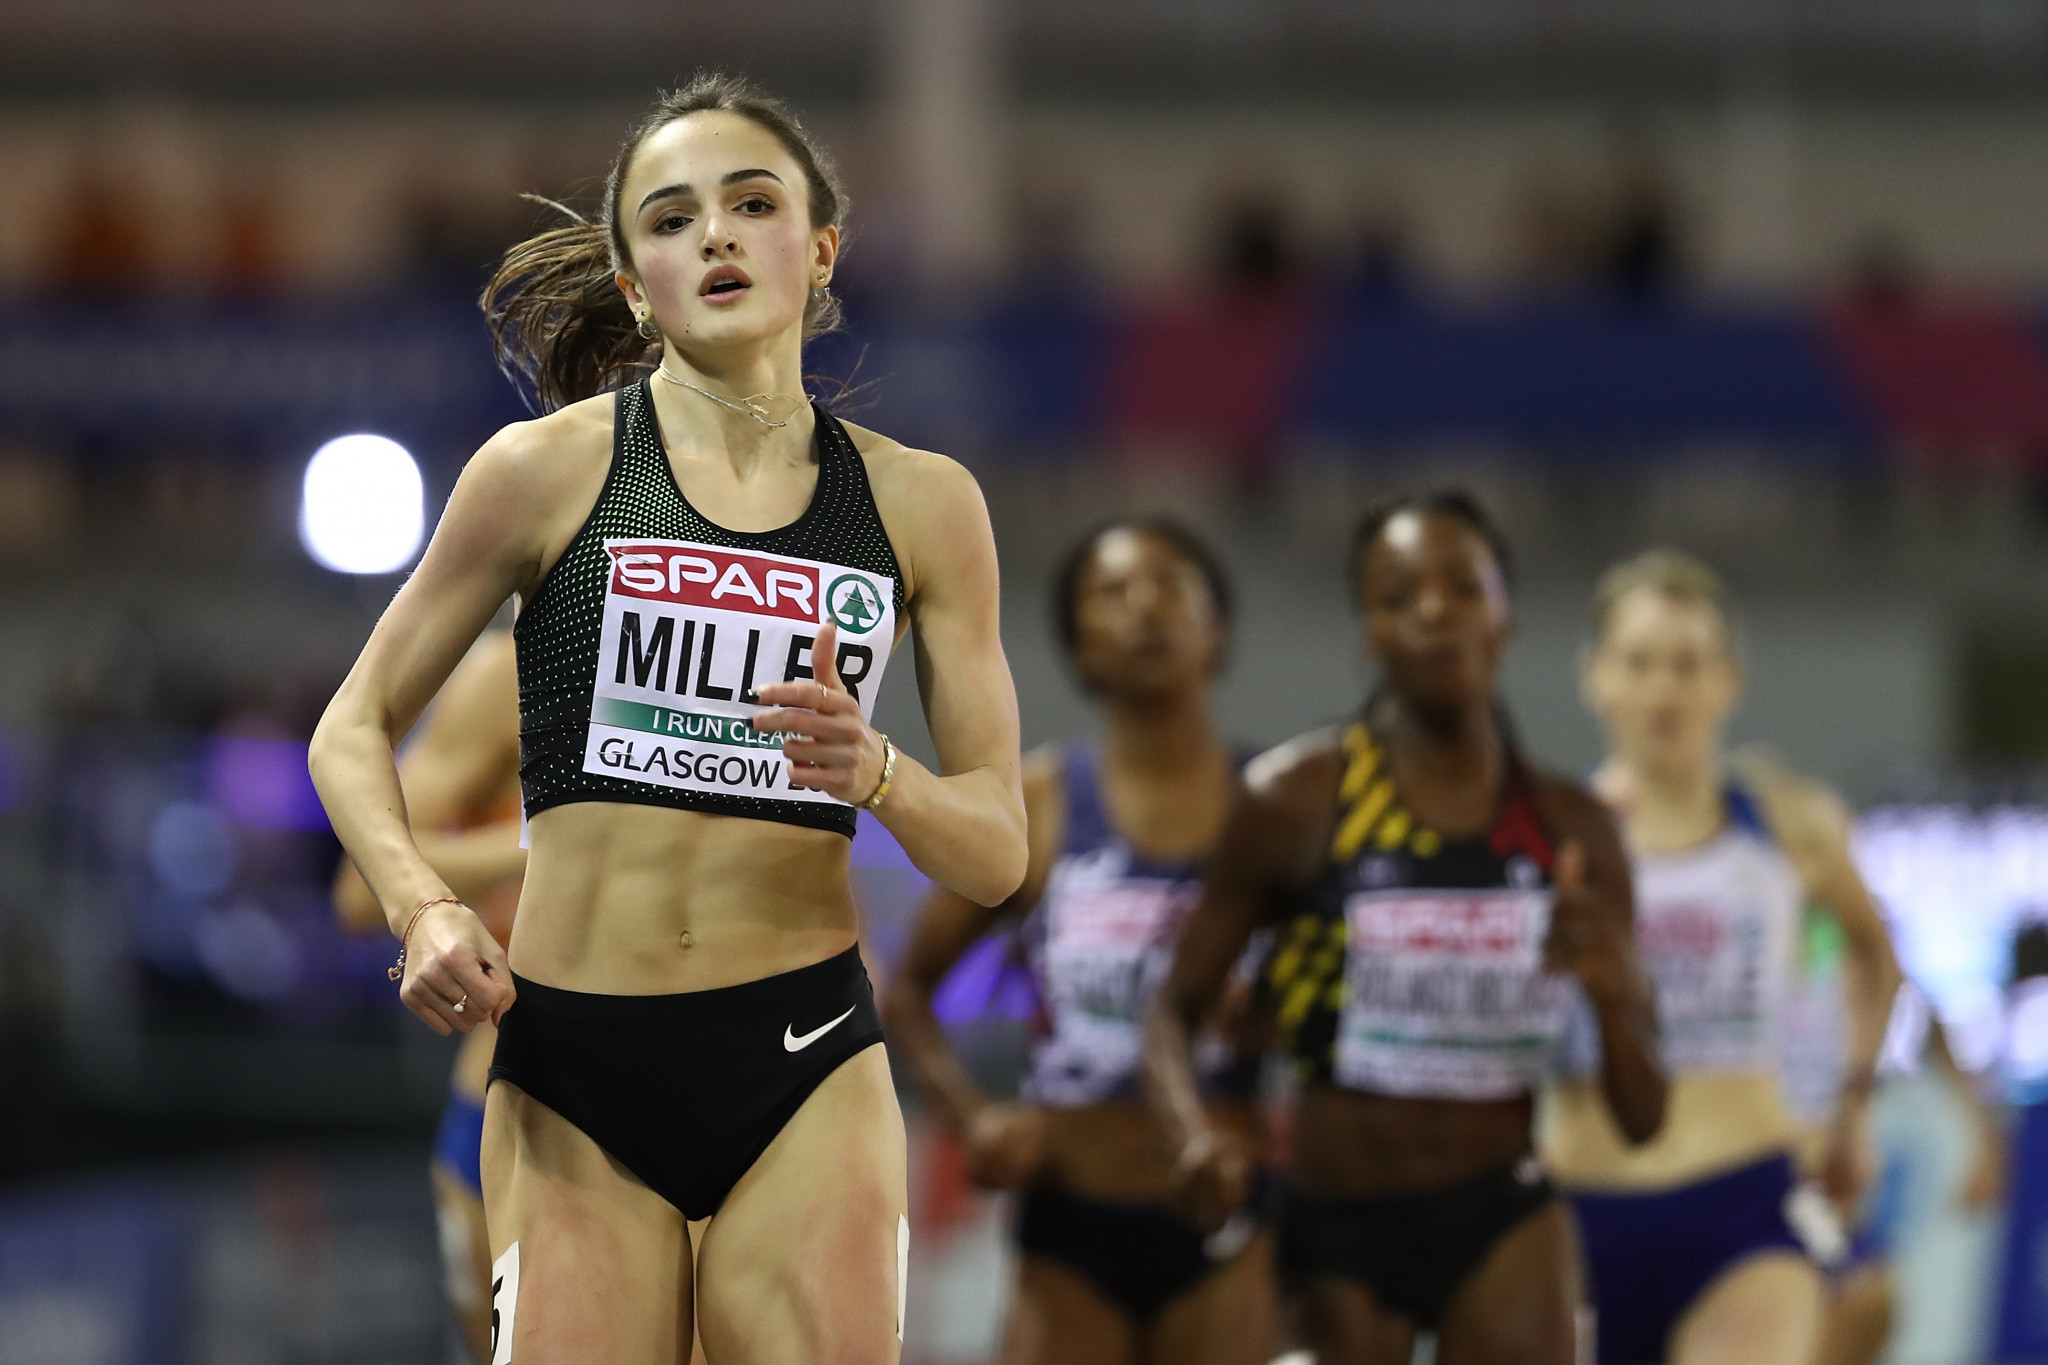 Polina Miller is among a group of 12 athletes the Russian Athletics Federation wants to send to compete at the Summer Universiade in Naples next month ©Getty Images